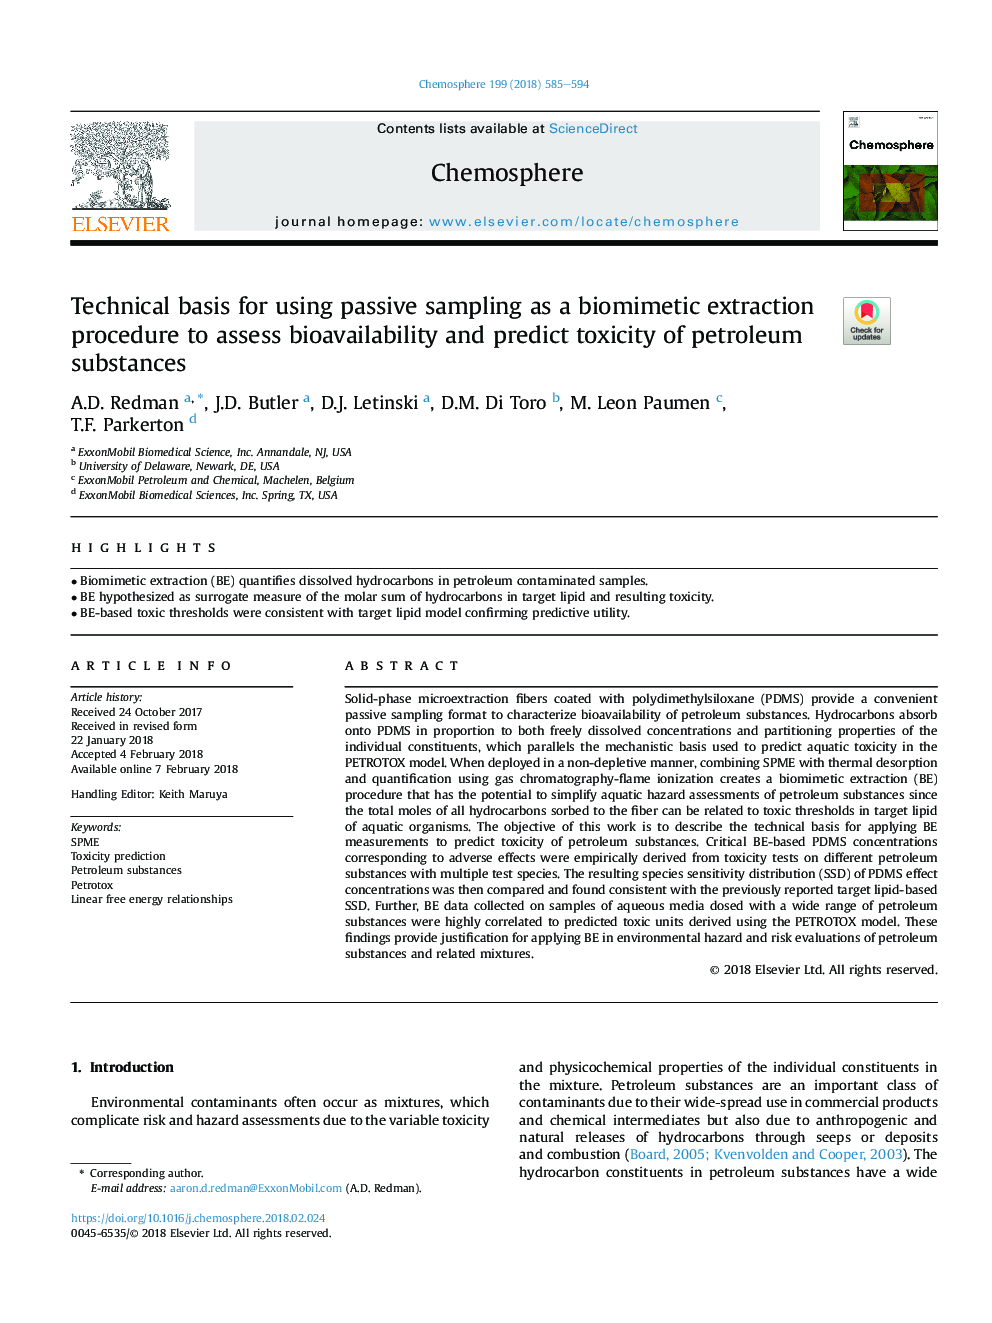 Technical basis for using passive sampling as a biomimetic extraction procedure to assess bioavailability and predict toxicity of petroleum substances